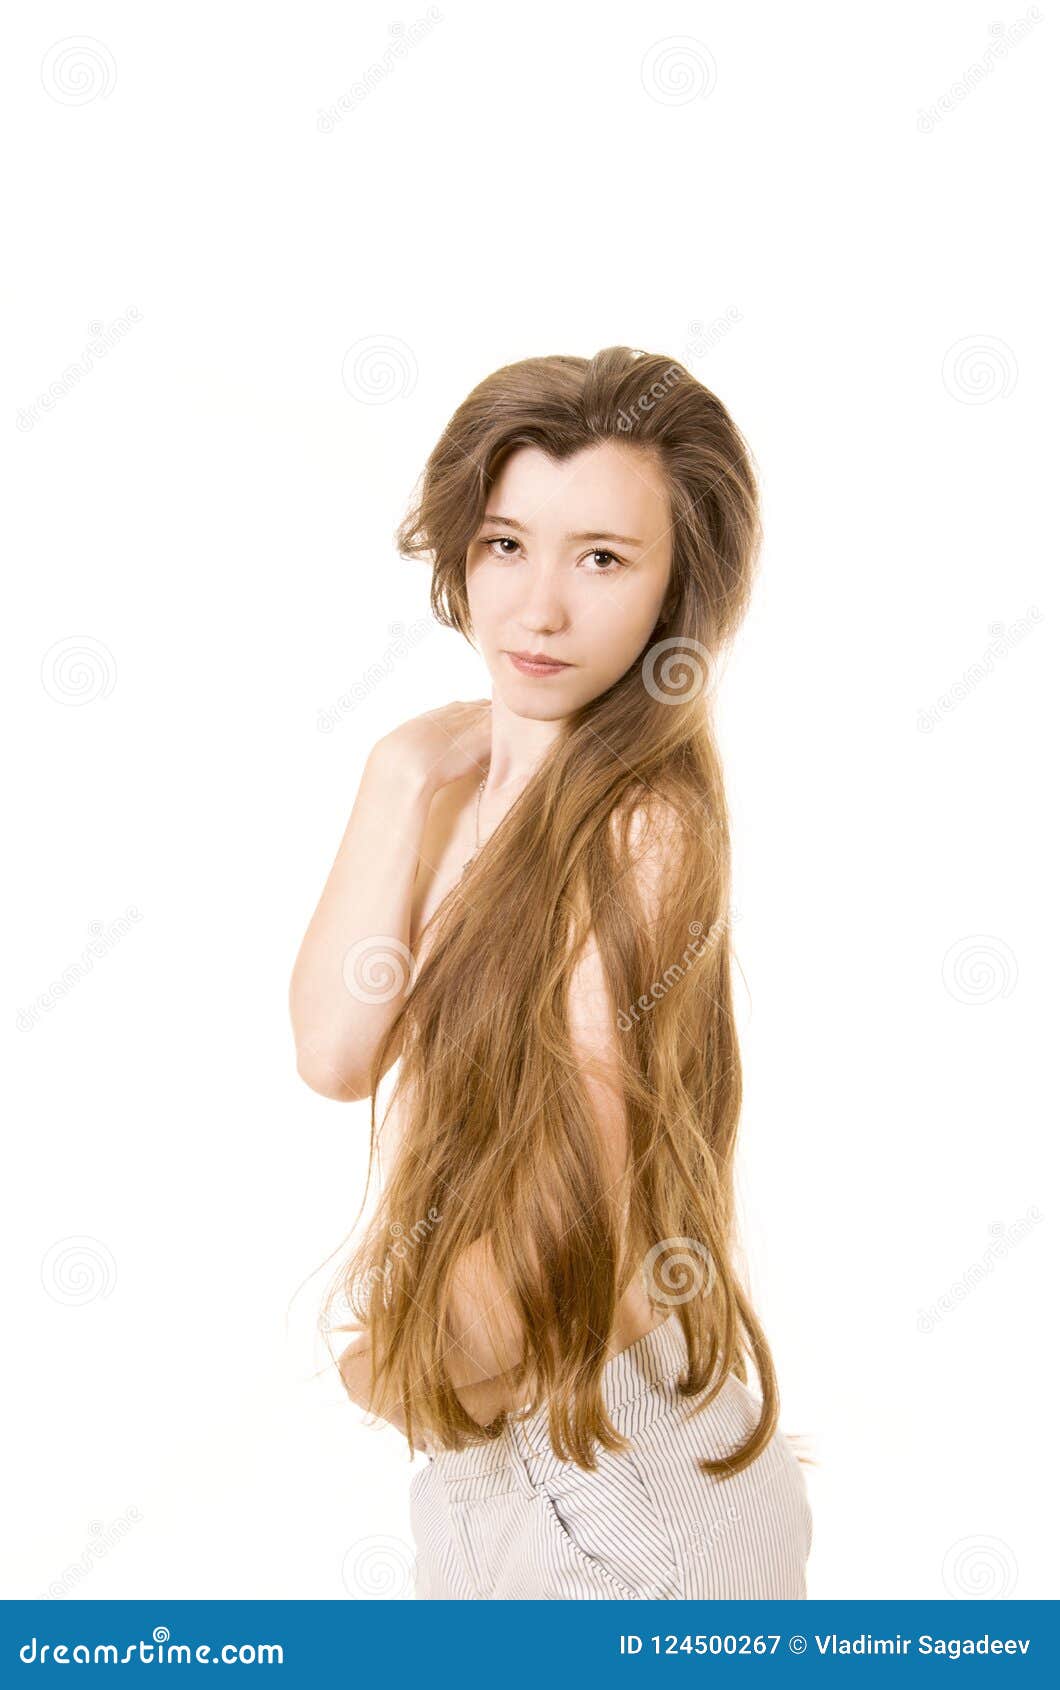 Women with long hair naked